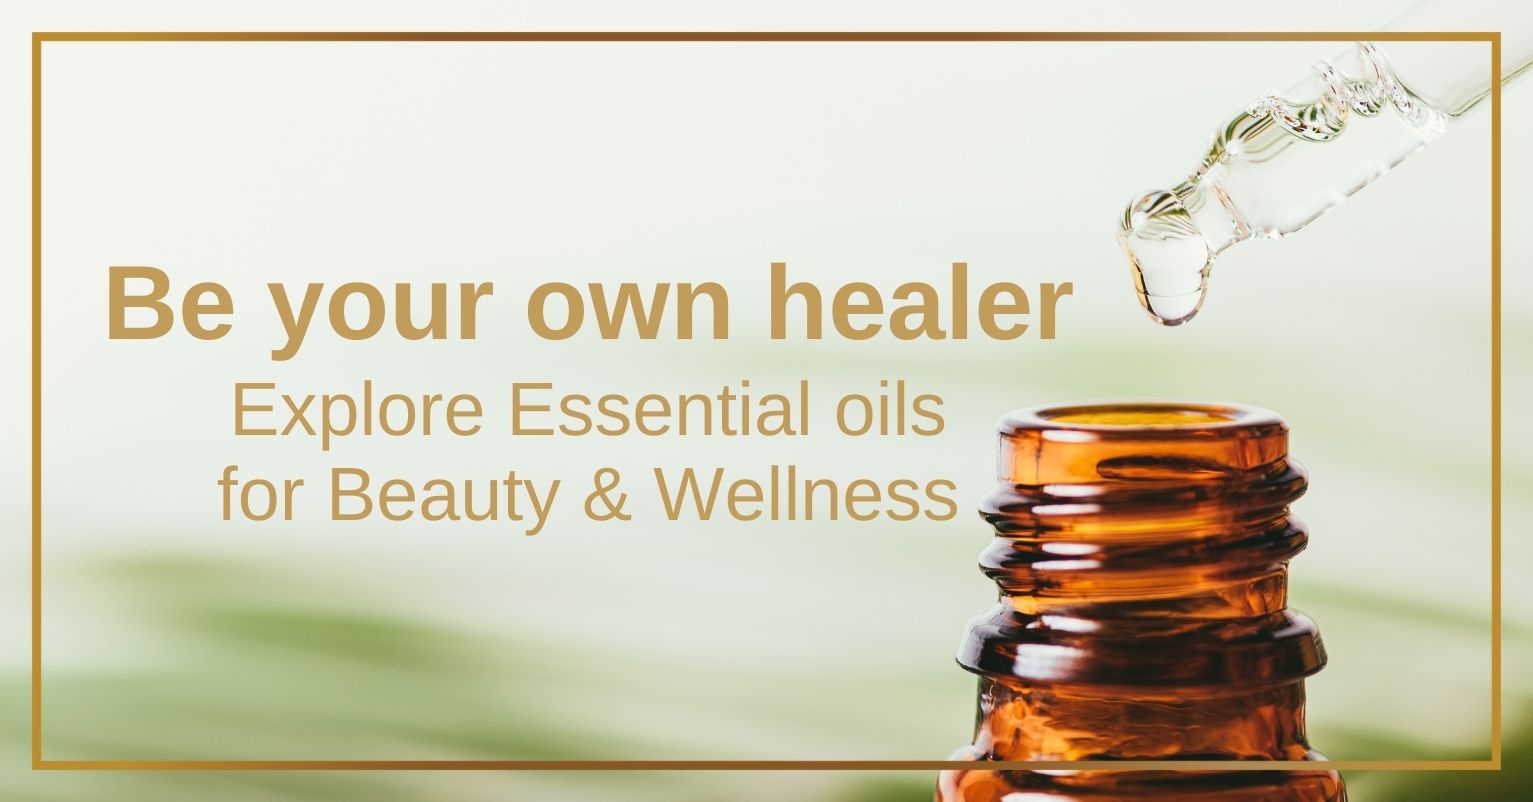 Be your own healer – Explore Essential oils for Beauty & Wellness